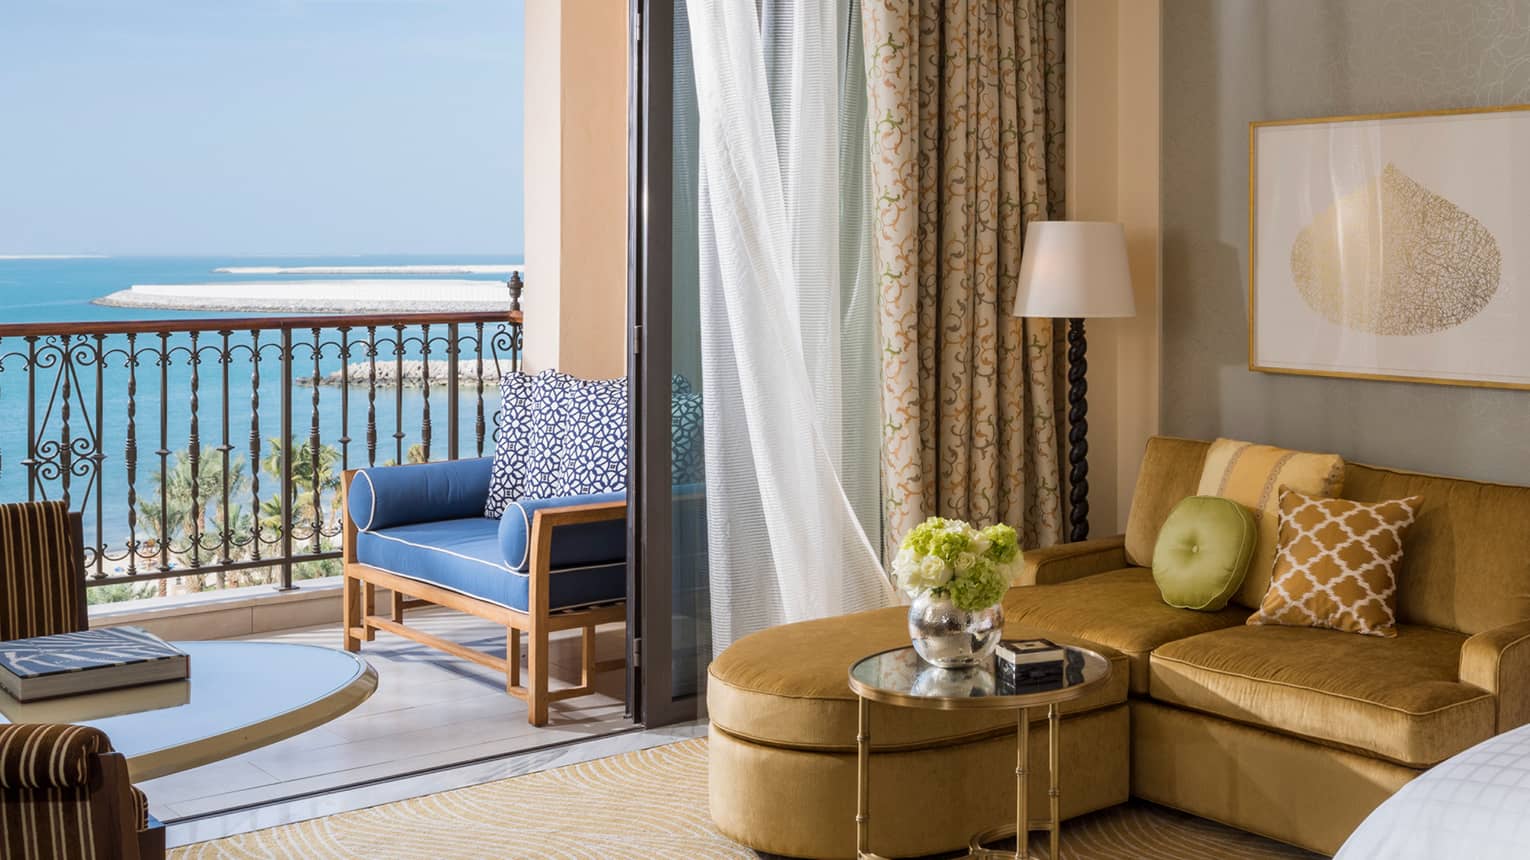 Premier Sea-View Room with L-shaped gold sofa beside oversized sliding glass door to balcony